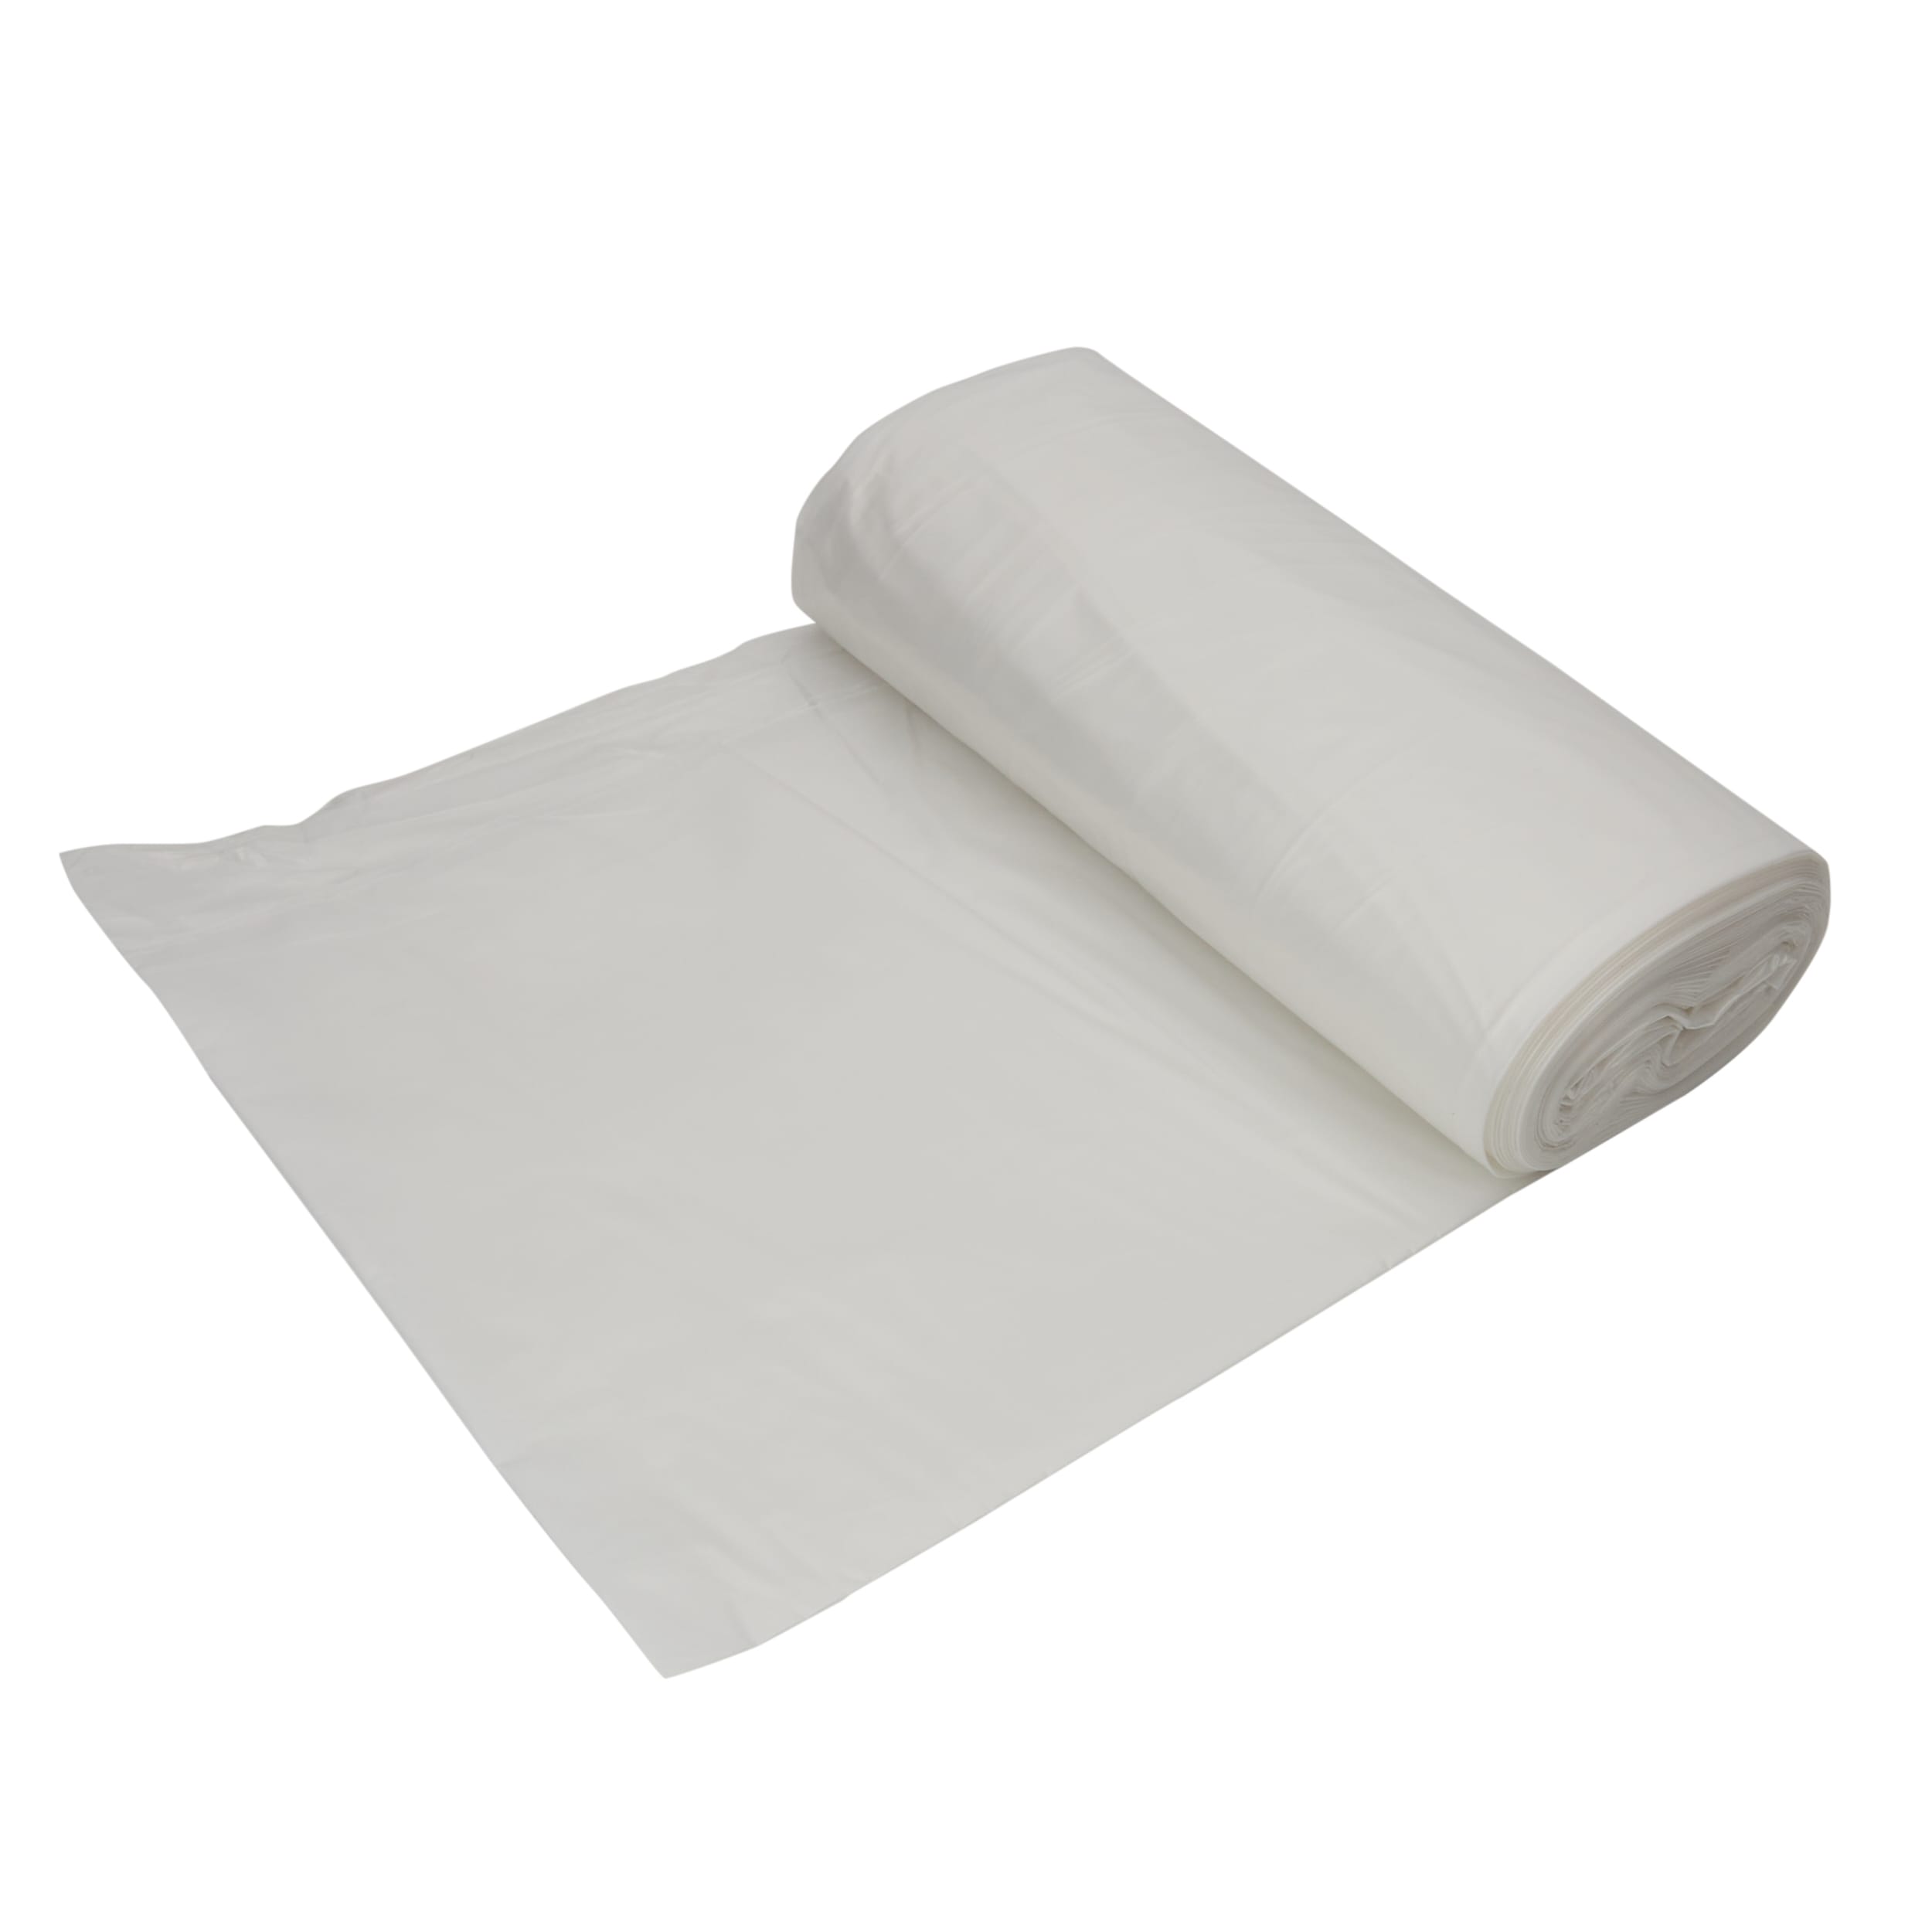 2 Mil Plastic Drop Cloth For Painting, Plastic Sheeting 3 Pack